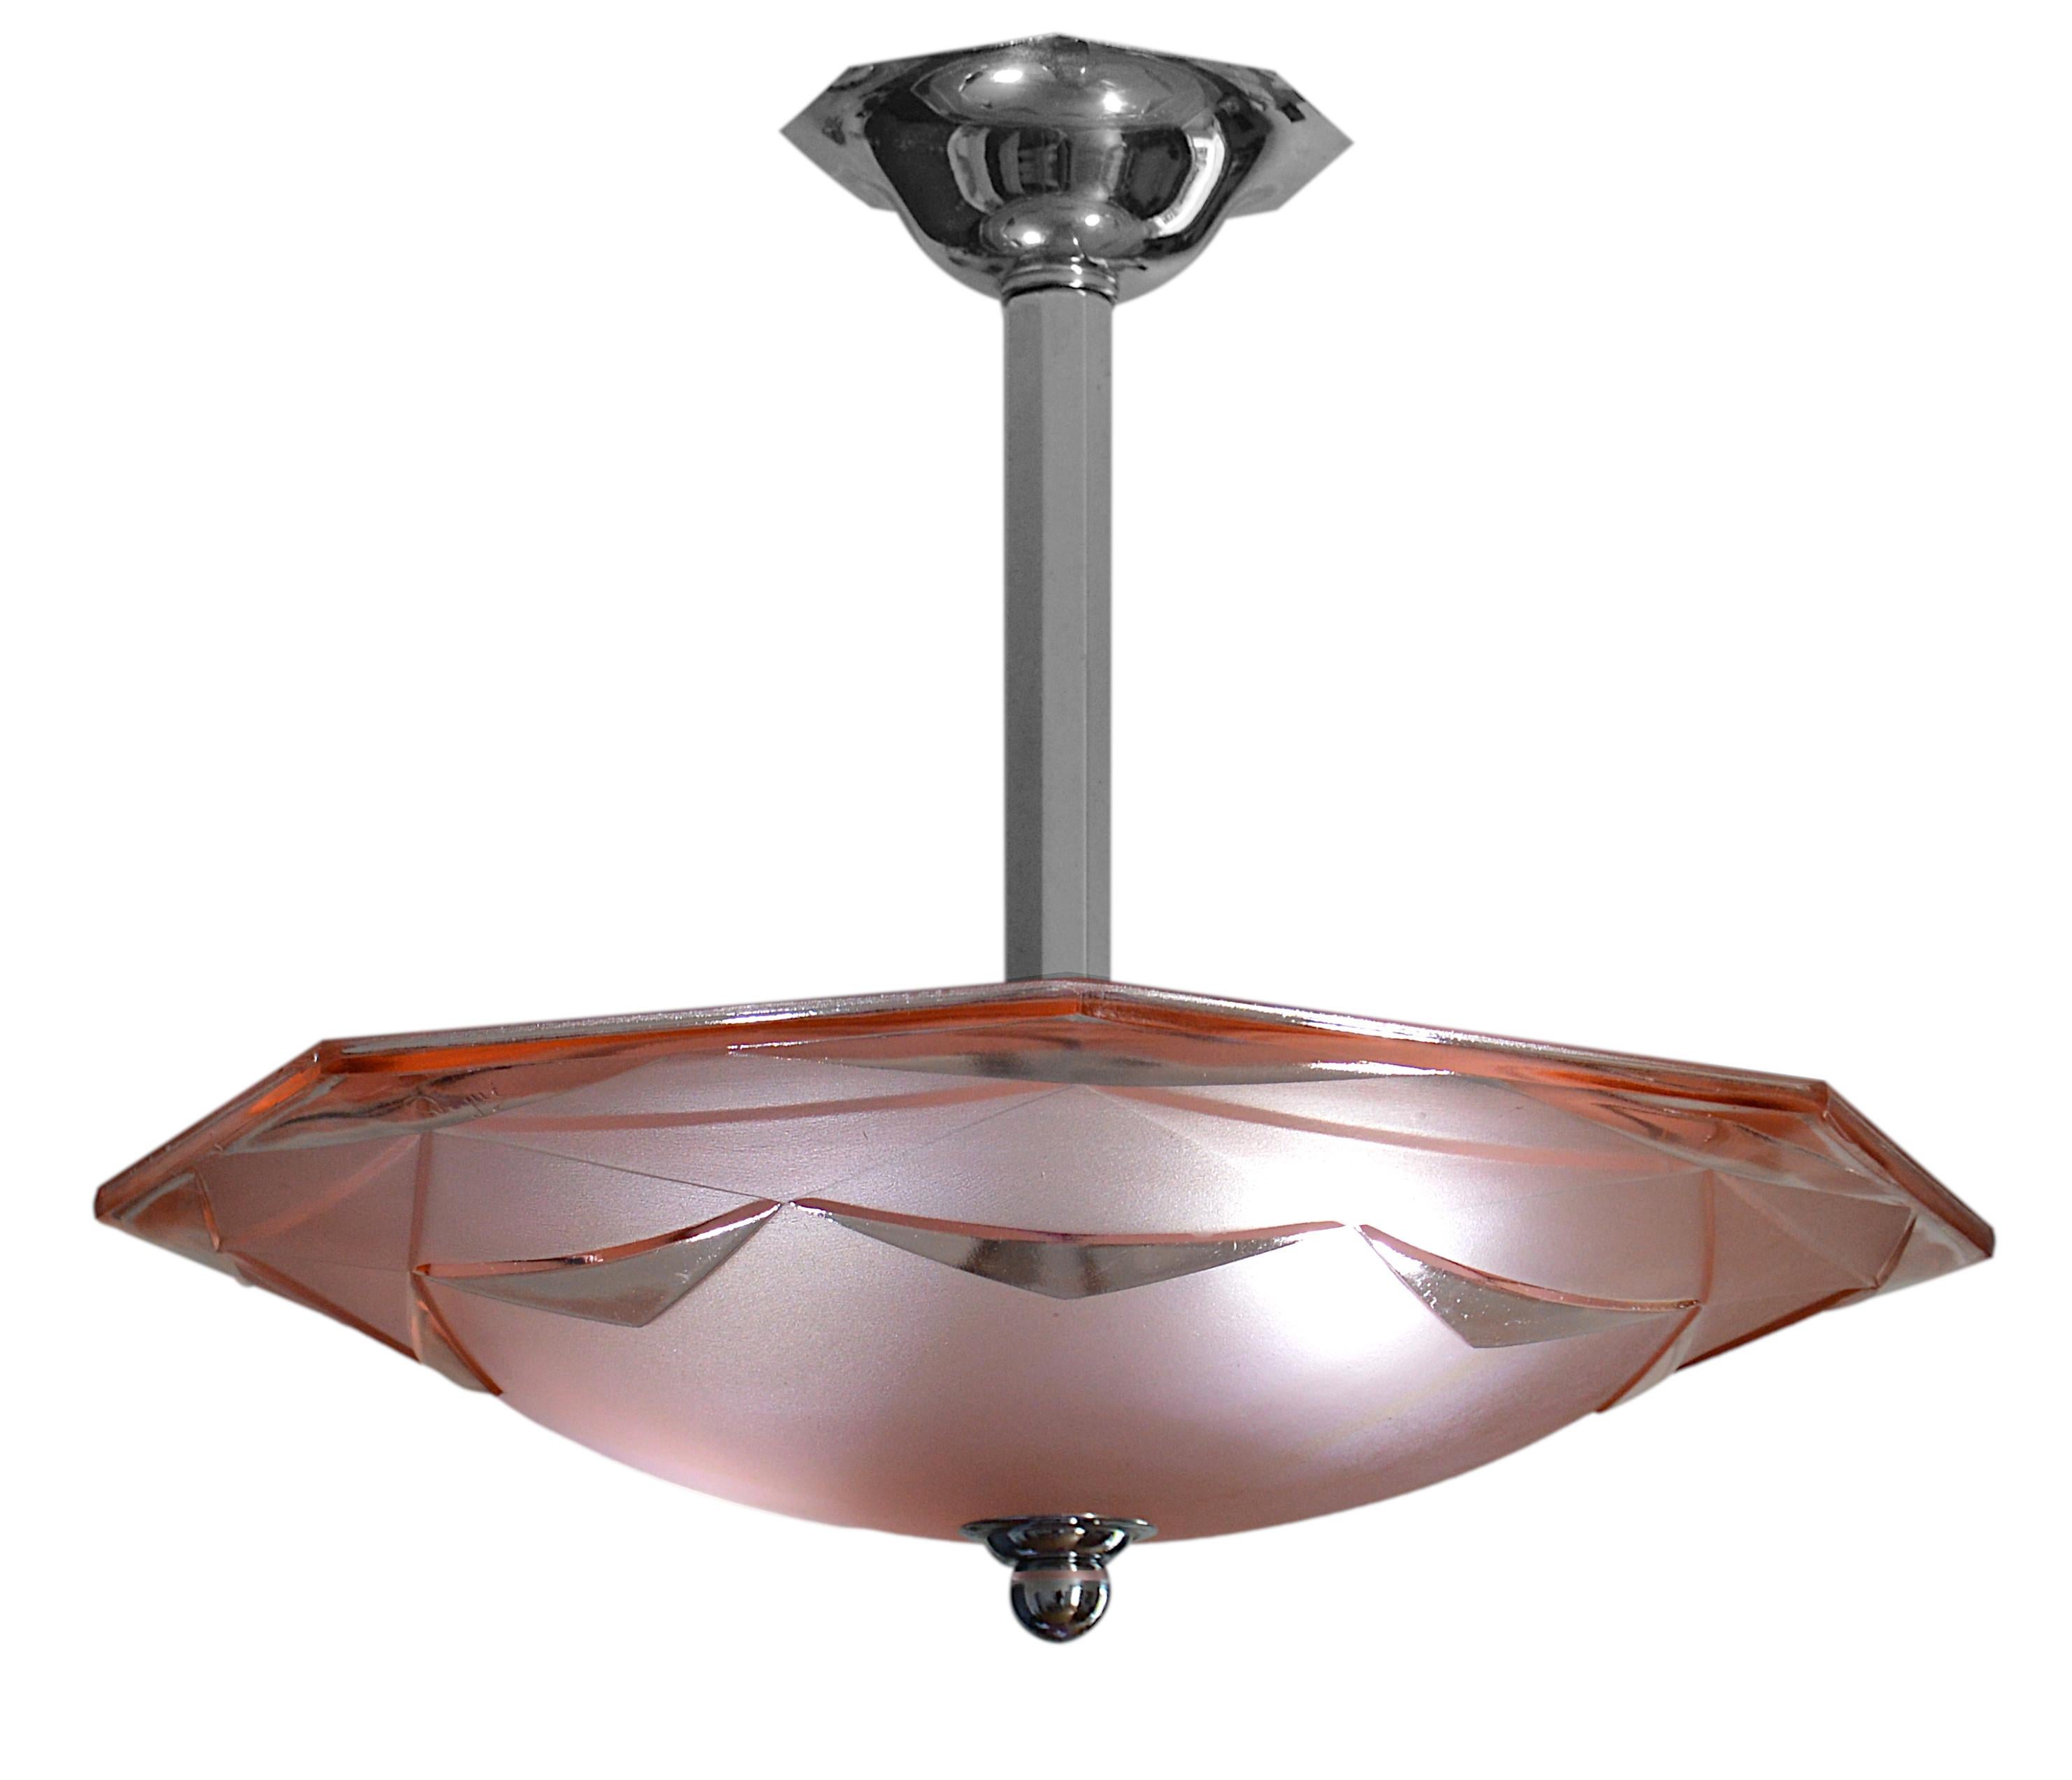 French Art Deco pendant chandelier by Degue (Compiegne), France, Early 1930s. Pink frosted glass shade with an Art Deco geometric pattern. Chrome frame. Height: 24.8